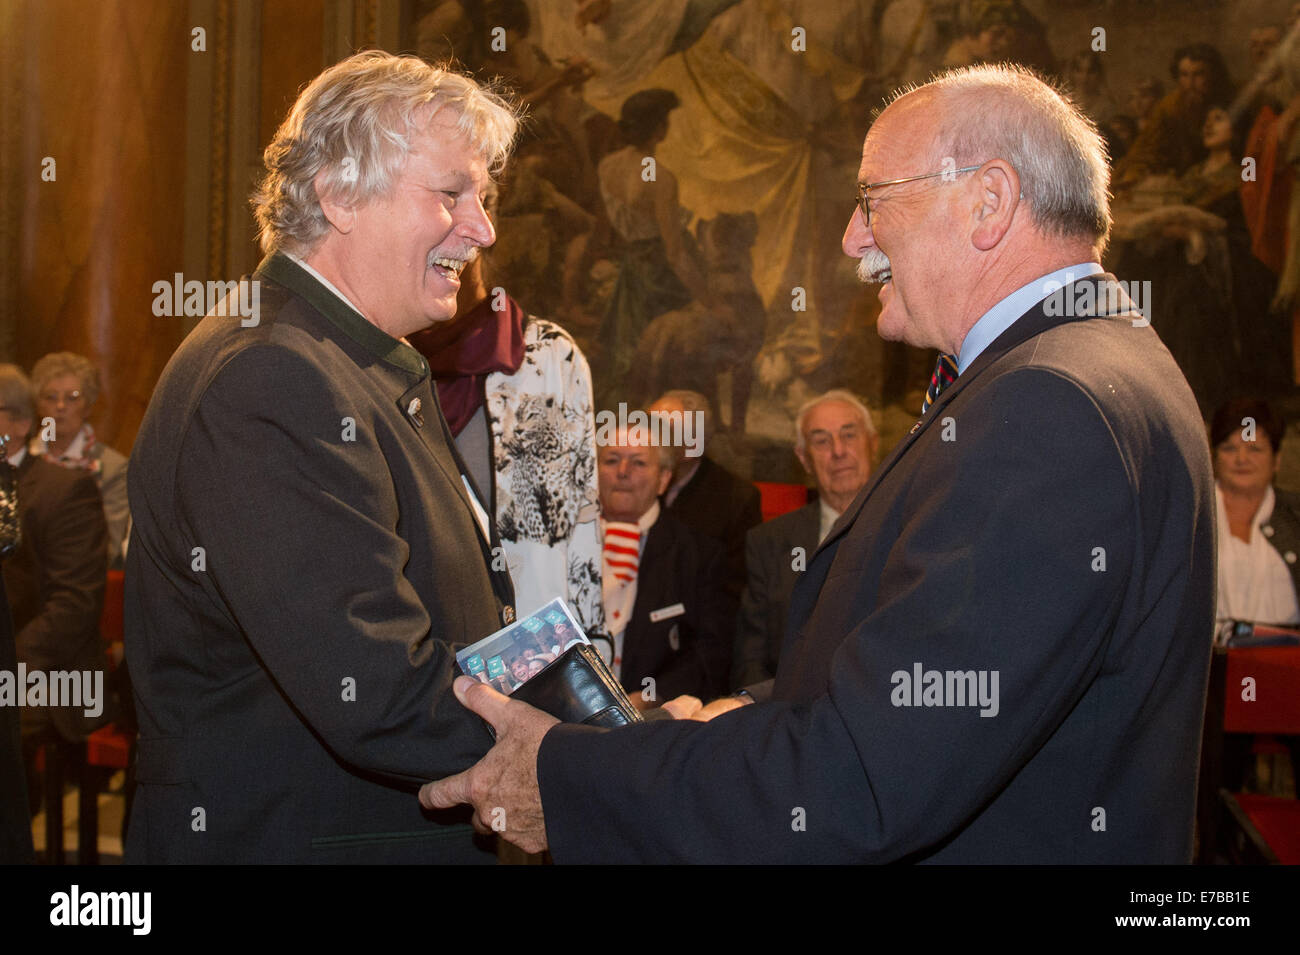 Passau, Germany. 12th Sep, 2014. Gerhard Meyer (C), the first East German refugee in the tent camp in Vilshofen and Hans Gschwendtner (CSU), former mayor of Vilshofen, stand in the historical City Hall in Passau, Germany, 12 September 2014. 25 years ago thousands of East Germans traveled to Austria and West Germany via Hungary after it opened its border to Austria. The Bavarian parliament is commemorating this historic moment with a ceremony in Passau. Photo: ARMIN WEIGEL/dpa/Alamy Live News Stock Photo